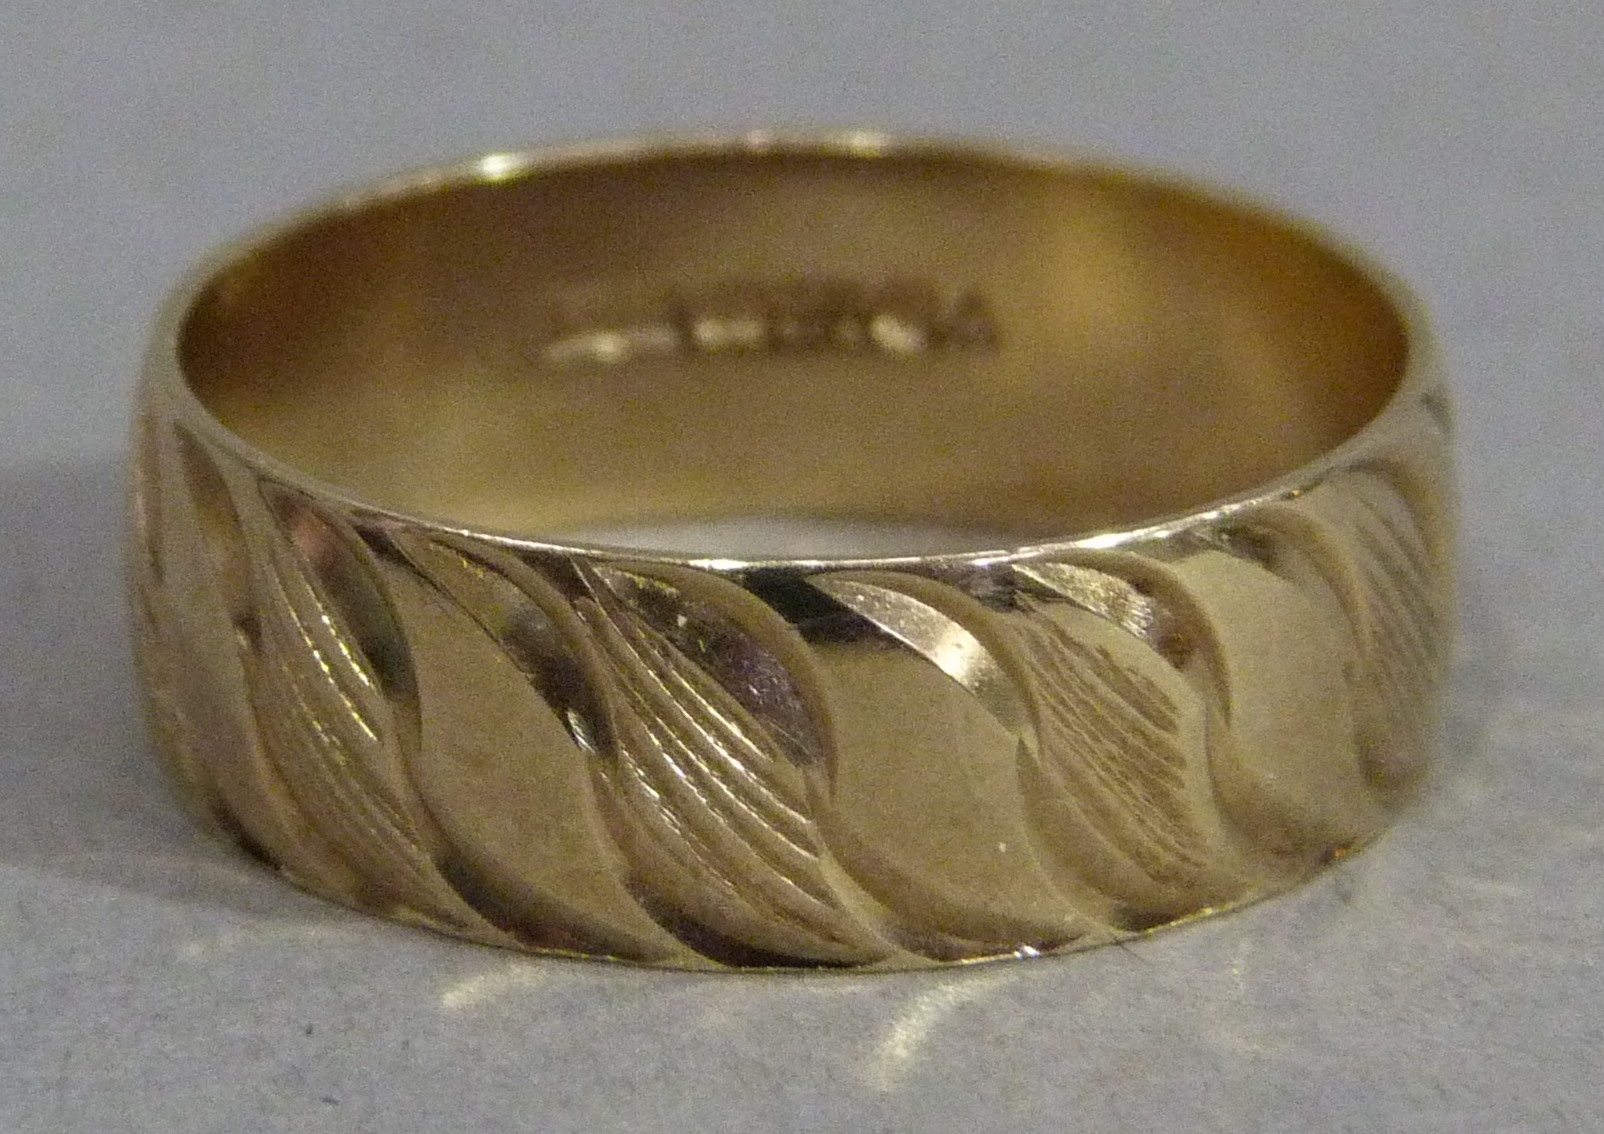 A wedding ring in 9ct gold, approximate weight 3gm